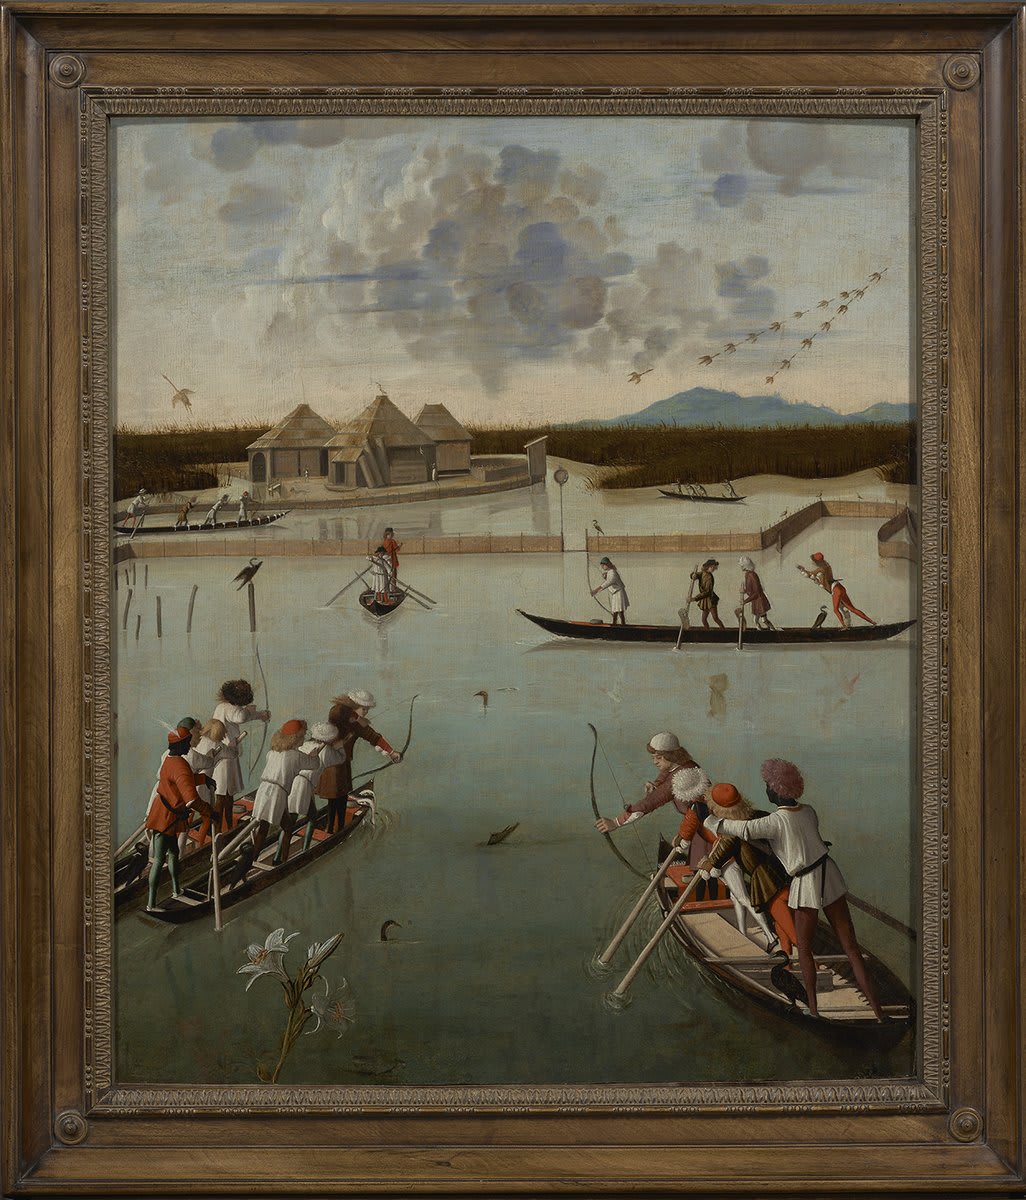 Flip this painting over for a surprise. In "Hunting on the Lagoon," Vittore Carpaccio uses a method called trompe l'oeil—meaning fool the eye—to depict notes on the back of his painting that are rendered so realistically they look three dimensional. Were you fooled?